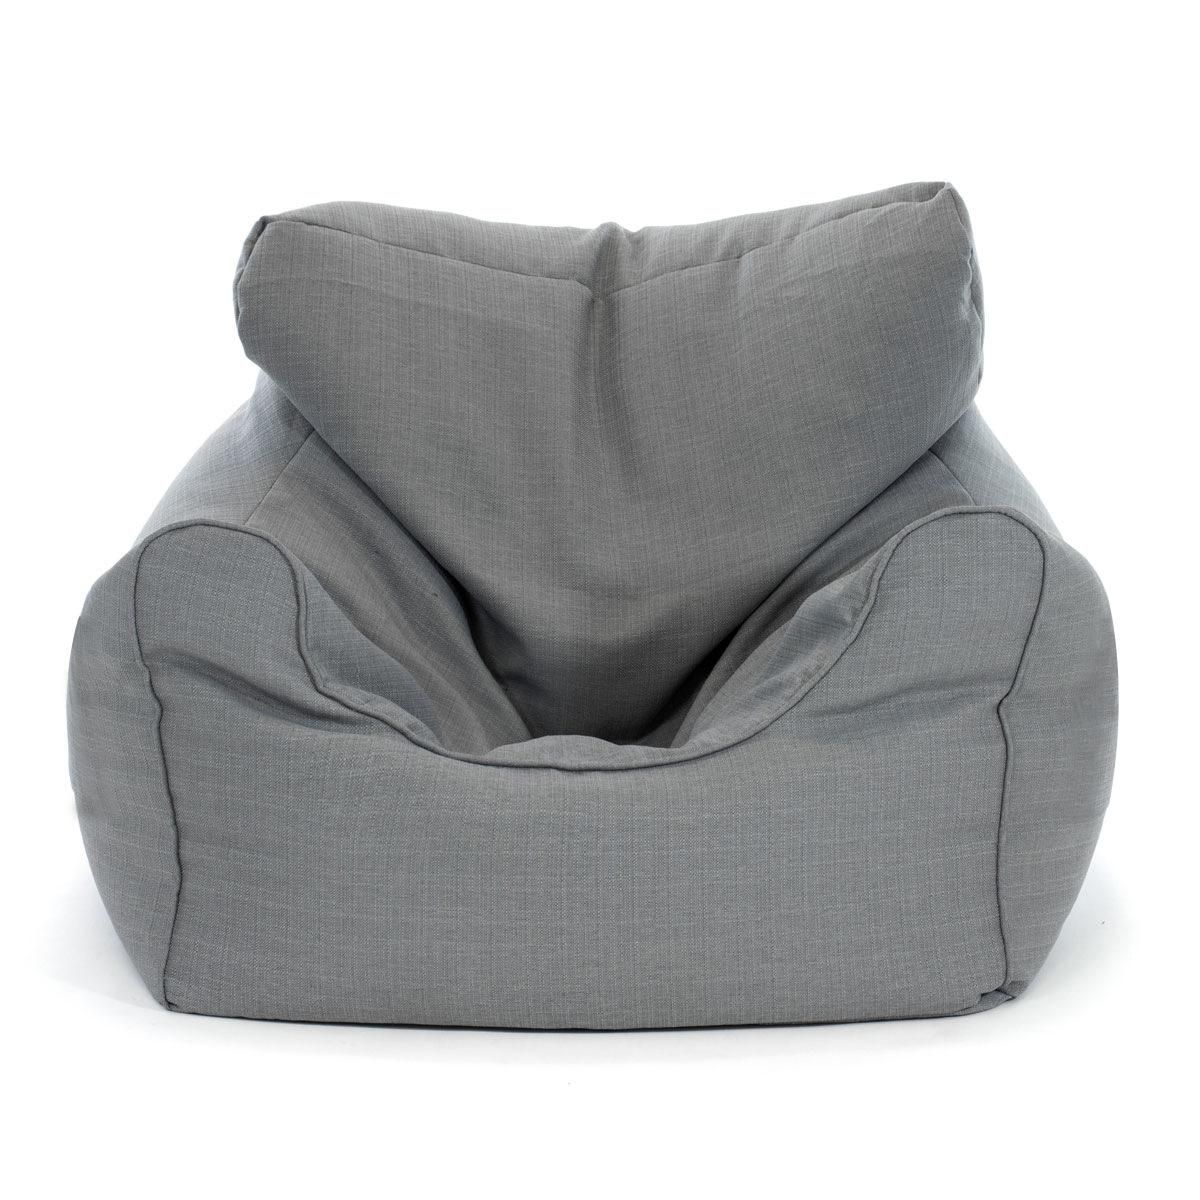 Large Luxury Bean Bag Cover Armchair Beanbag Sofa/chair Armrest Throughout Bean Bag Sofa Chairs (View 9 of 20)